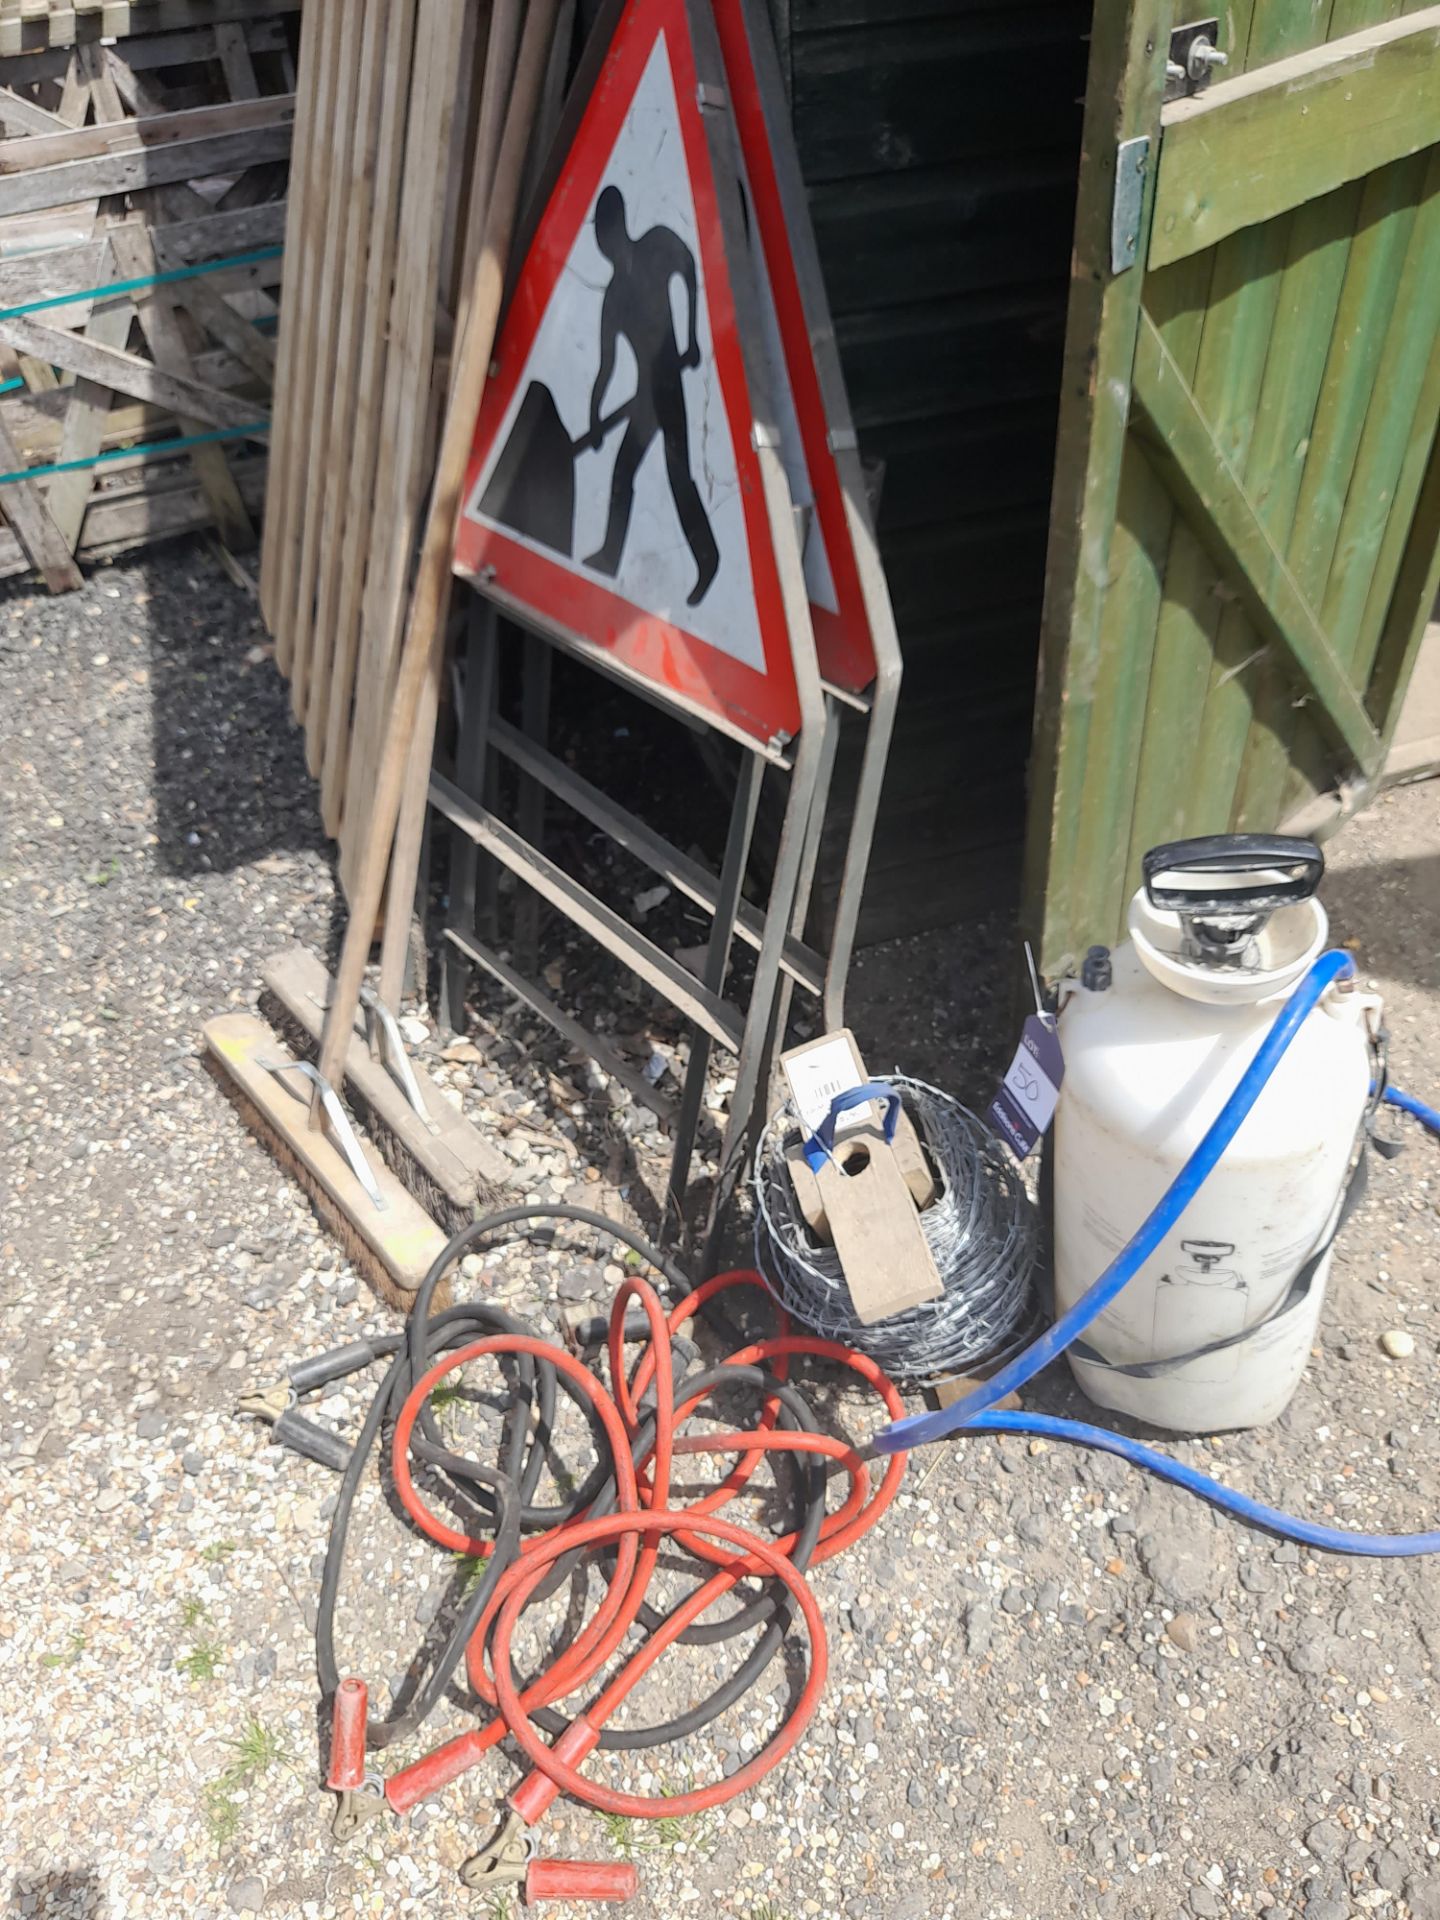 Set of Jump Leads, 2 x Men At Work Road Signs, Yard Brooms, 16Ltr Spray Bottle and Roll of Barbed - Image 2 of 3